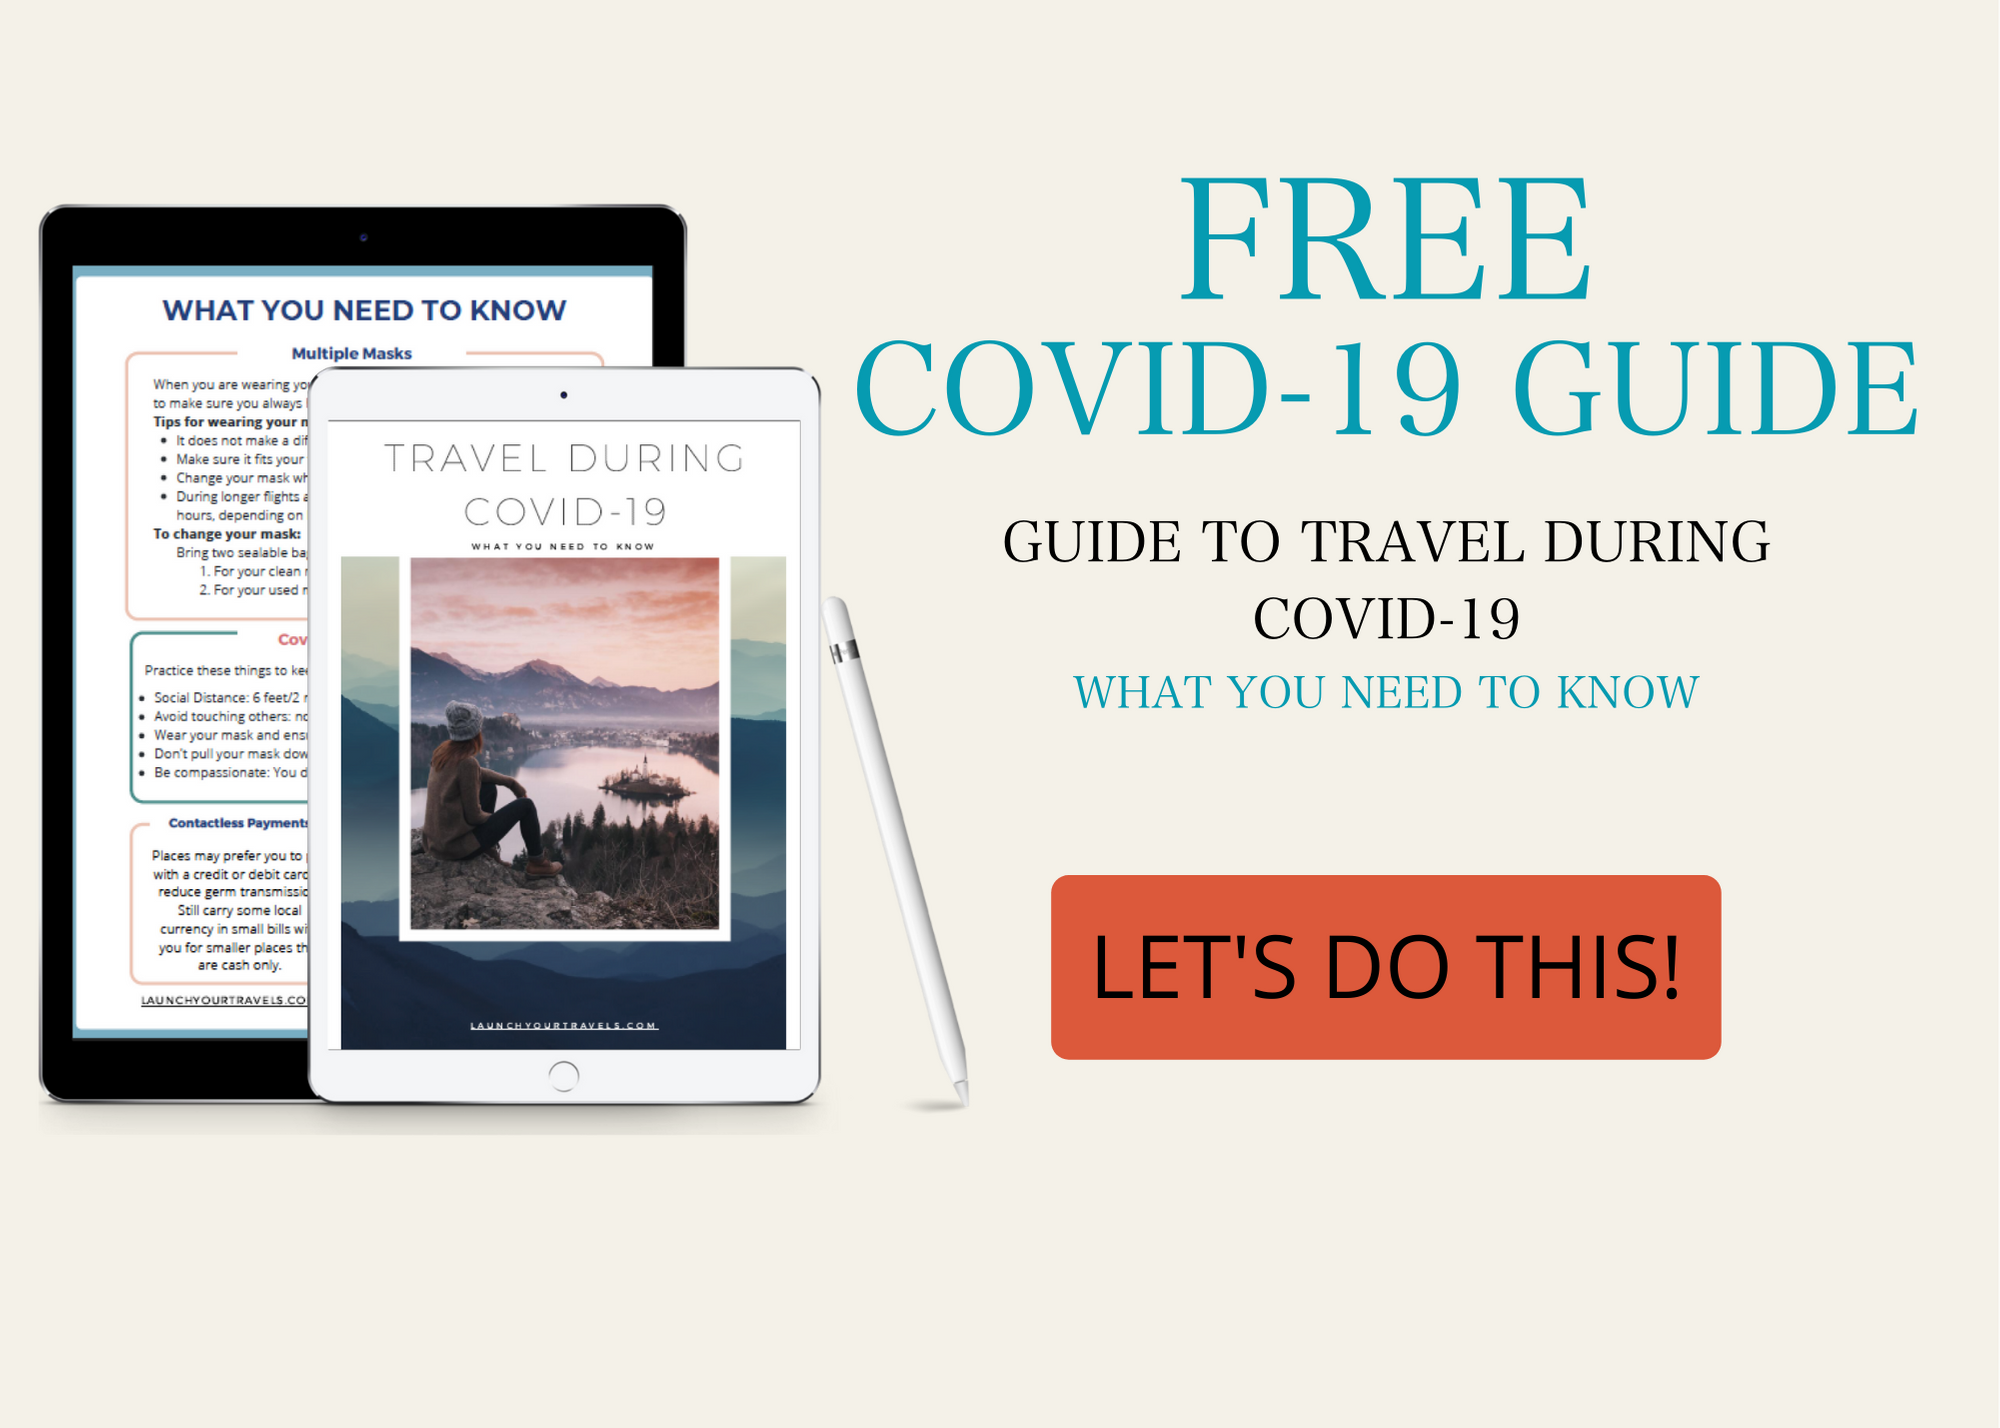 Guide to Travel During Covid-19